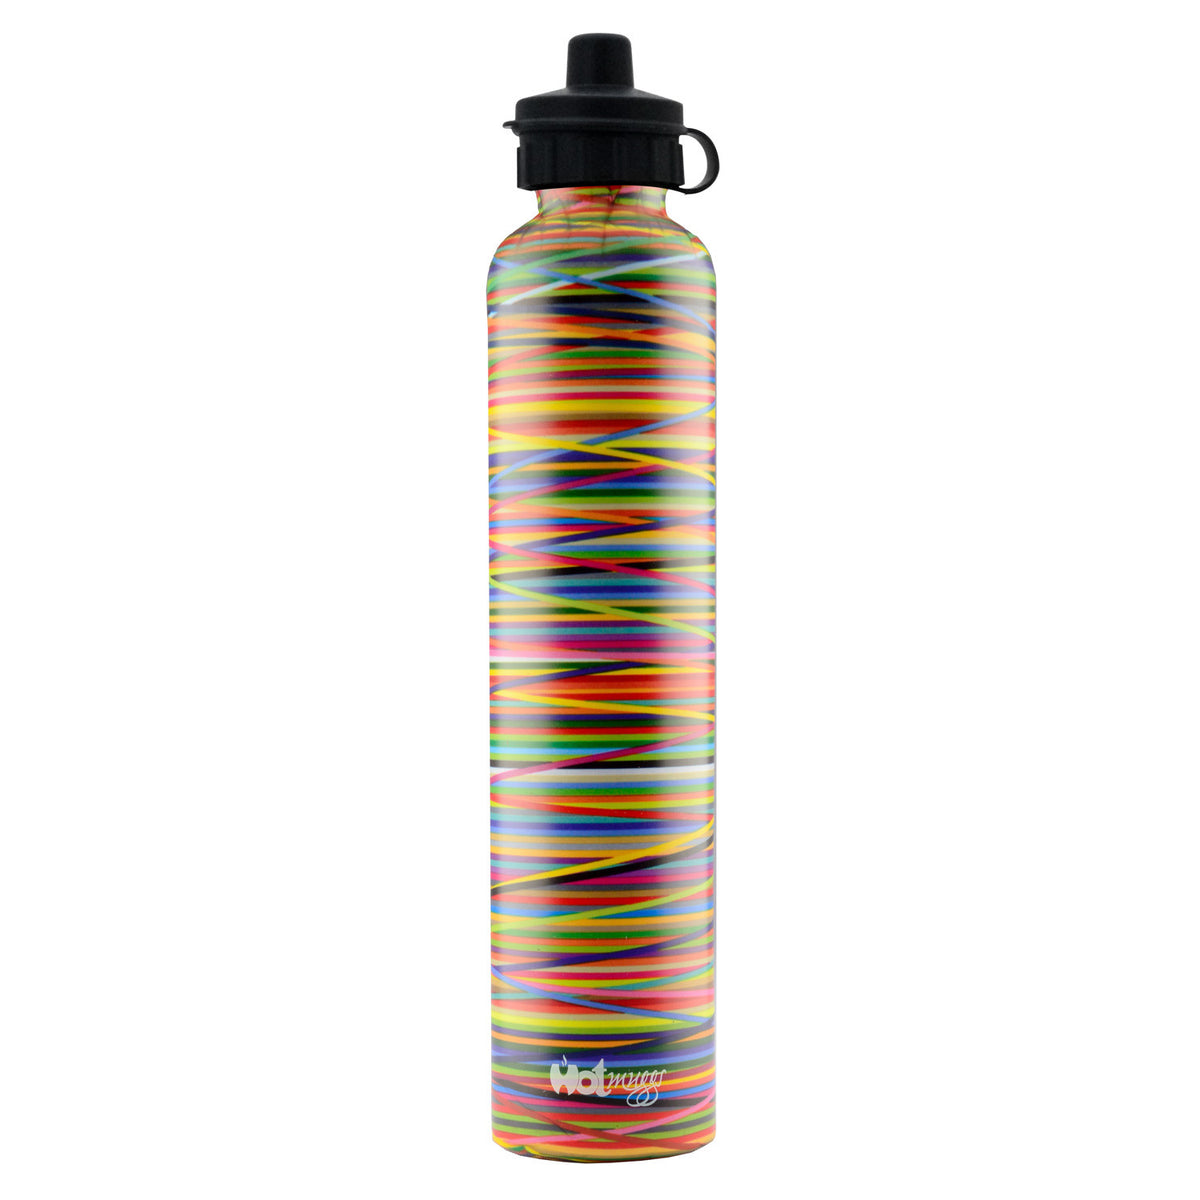 Colors Large with Pull Sippy Cap Stainless Steel 640 ml Bottle,1 Pc - Hot Muggs